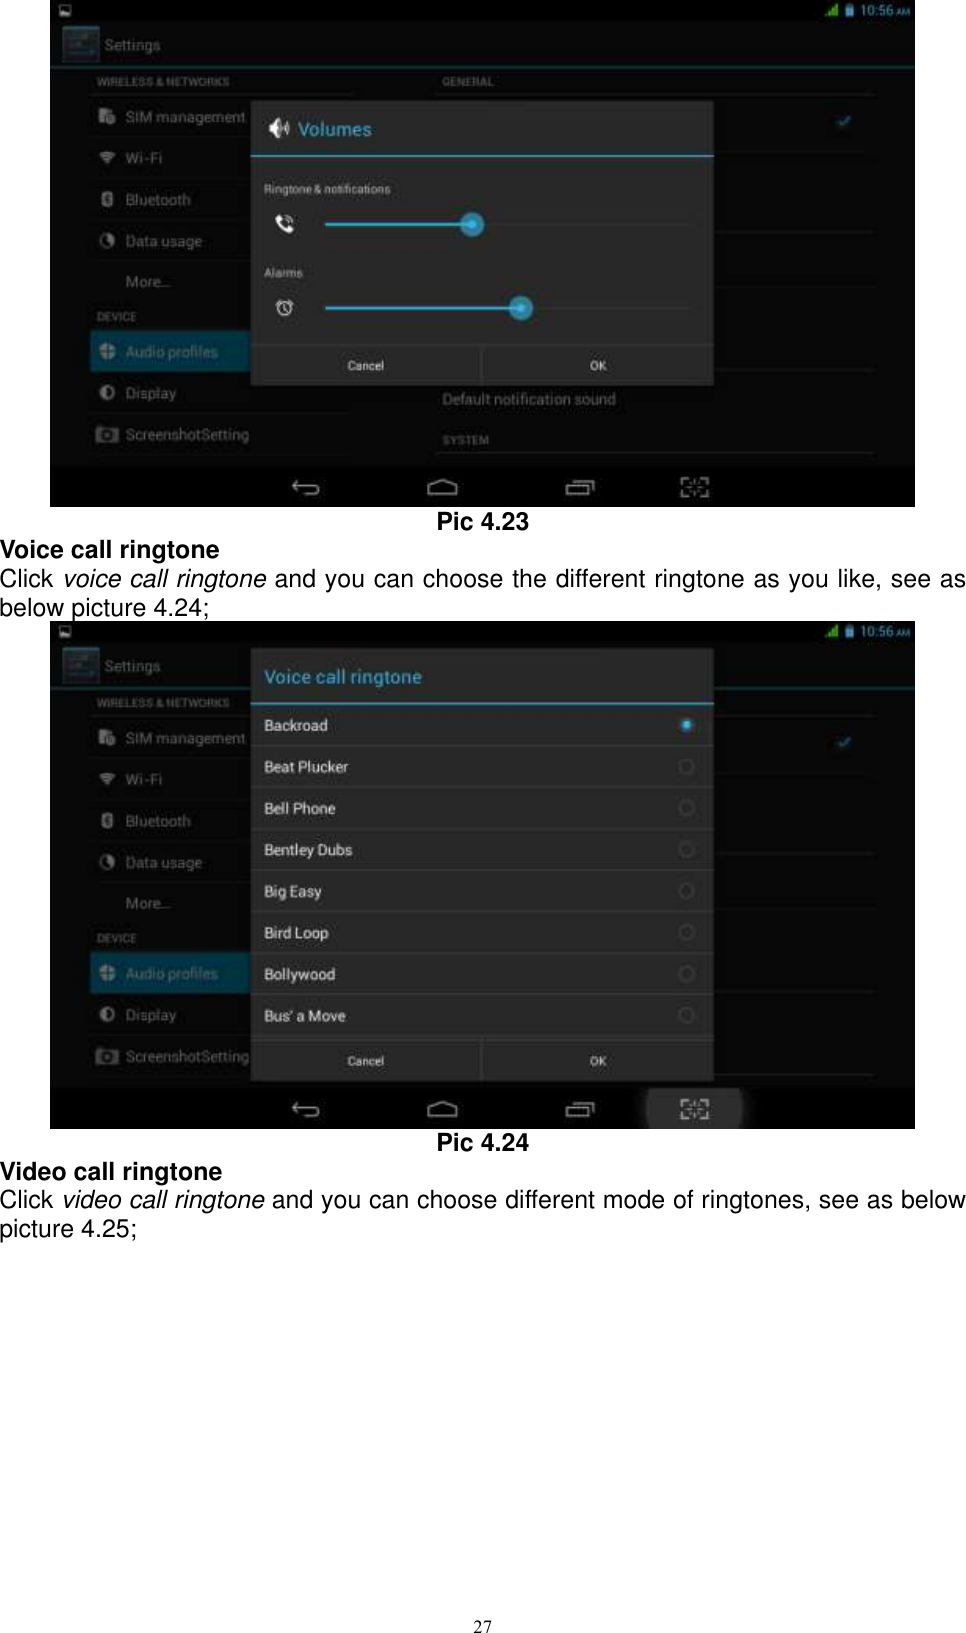      27  Pic 4.23 Voice call ringtone Click voice call ringtone and you can choose the different ringtone as you like, see as below picture 4.24;  Pic 4.24 Video call ringtone Click video call ringtone and you can choose different mode of ringtones, see as below picture 4.25; 